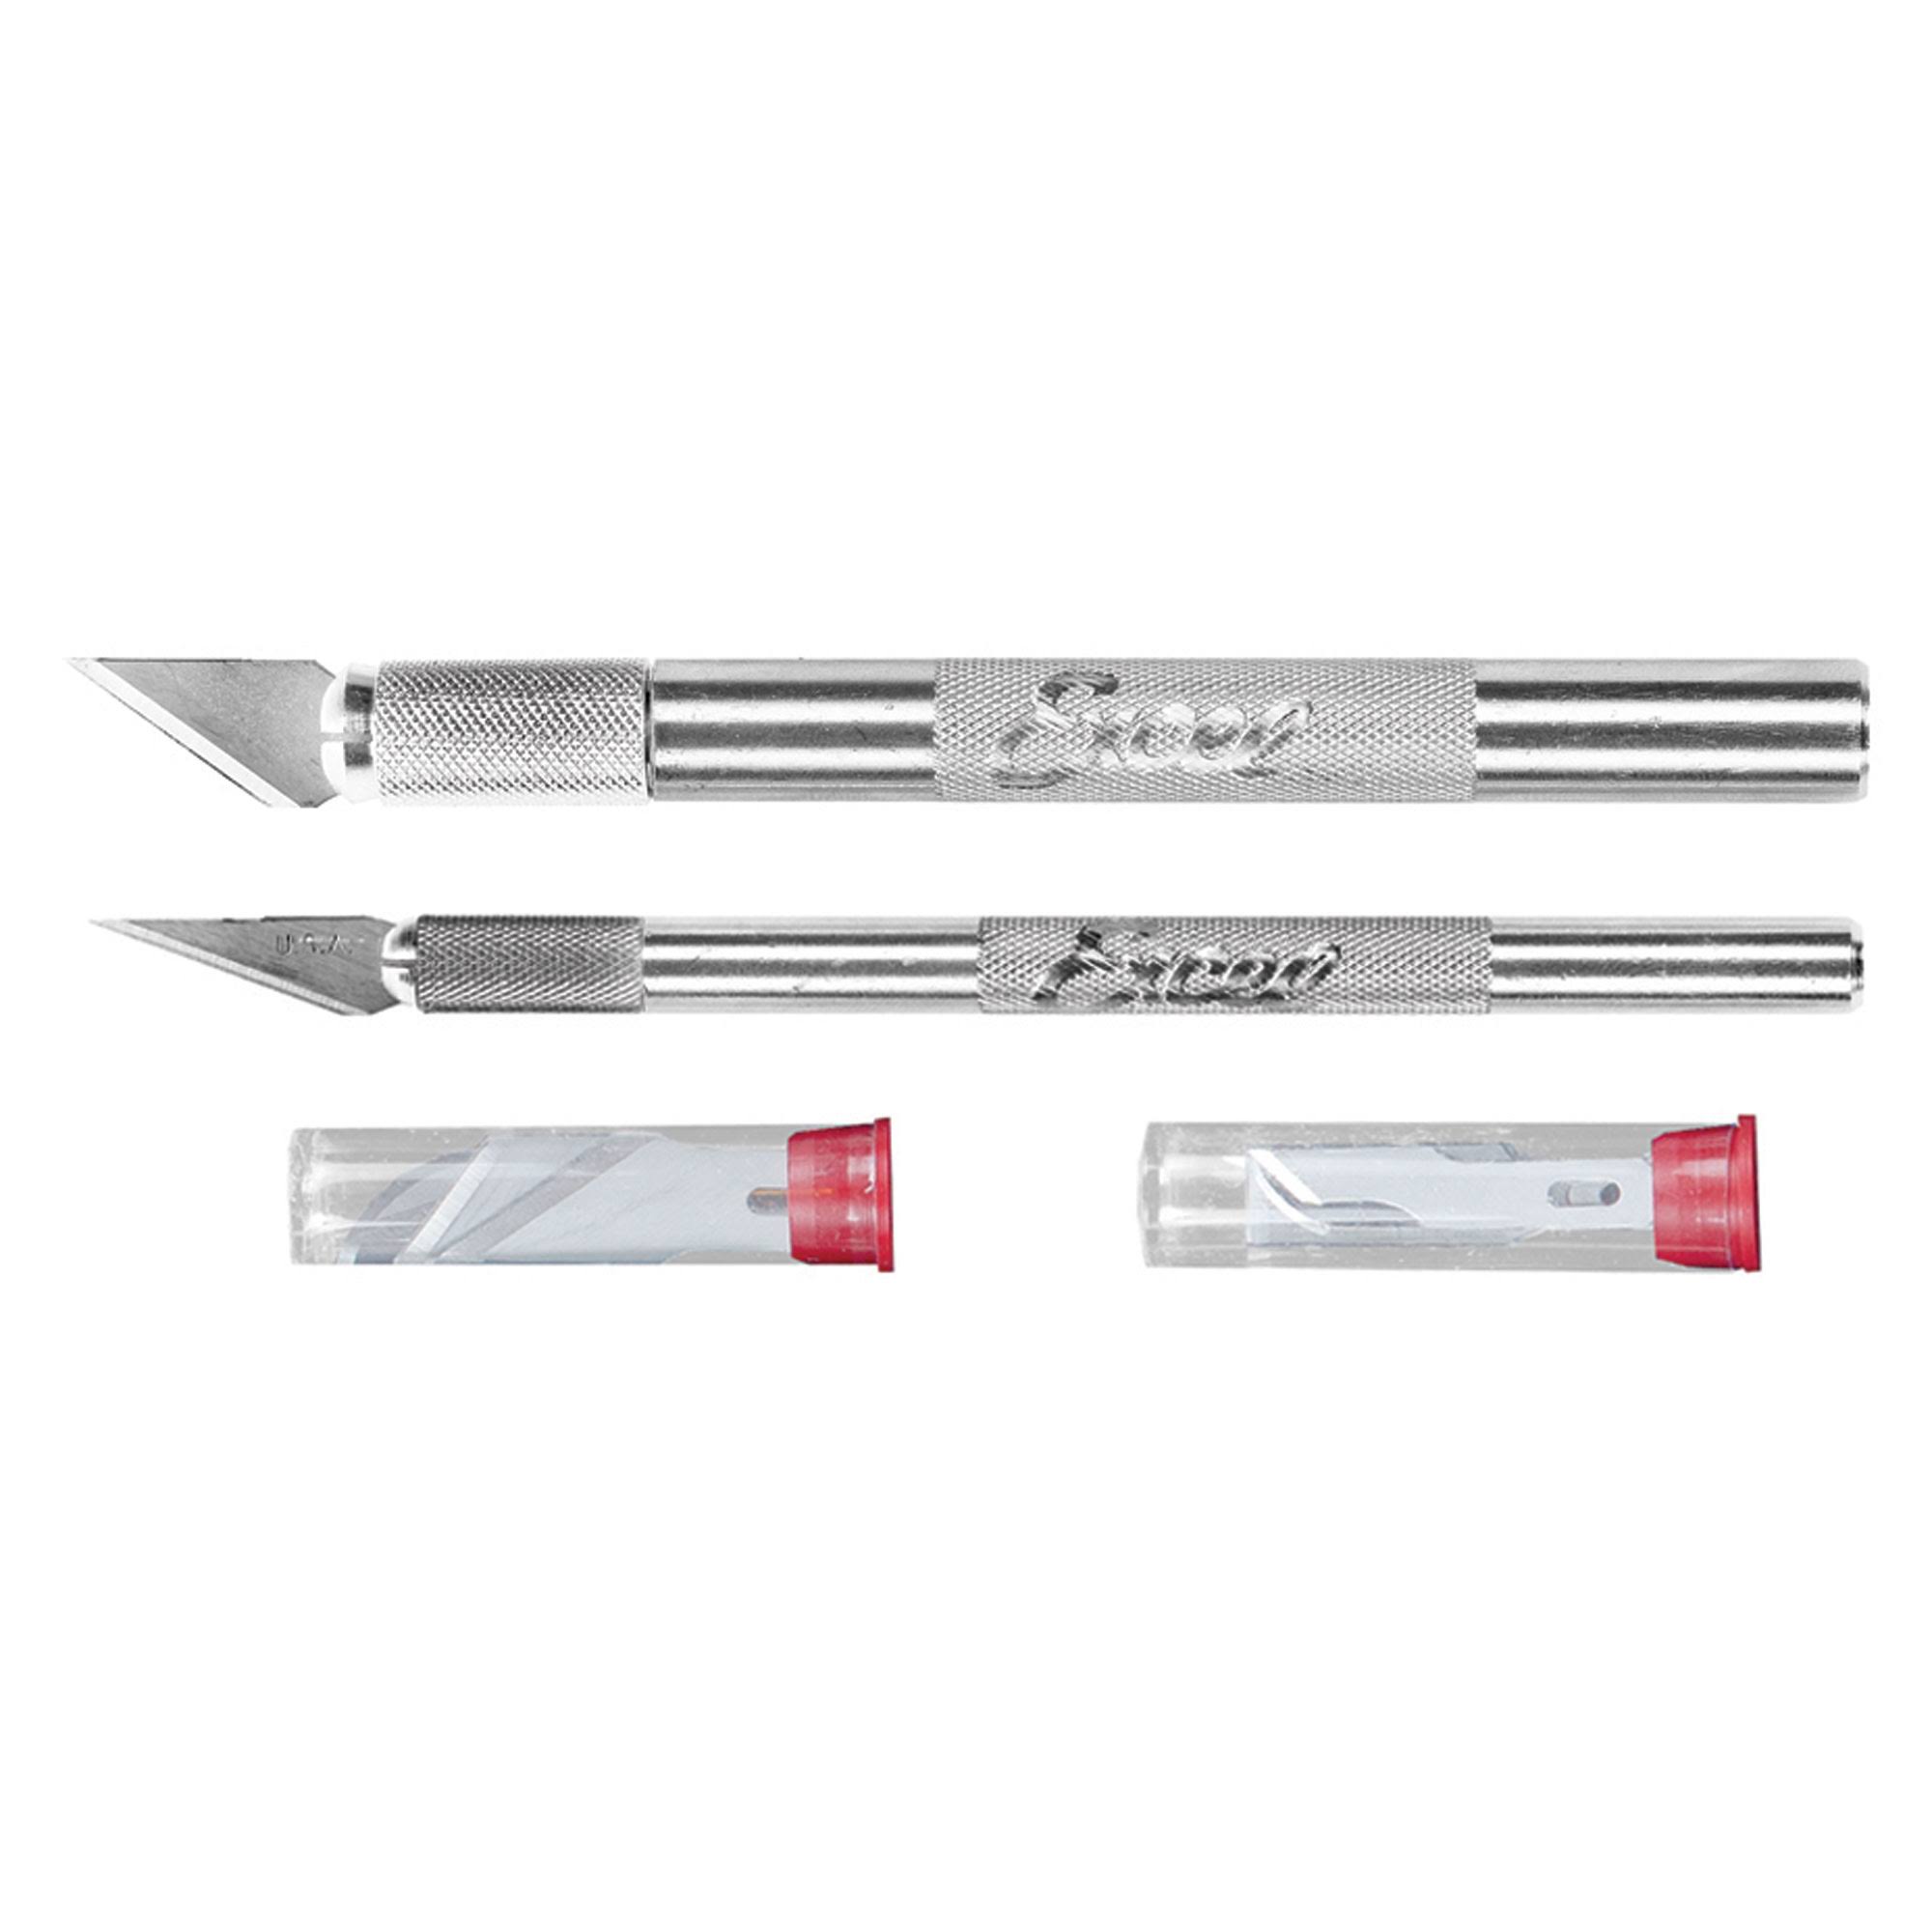 Excel Hobby Knife Set - with 10 Blades, 2ct